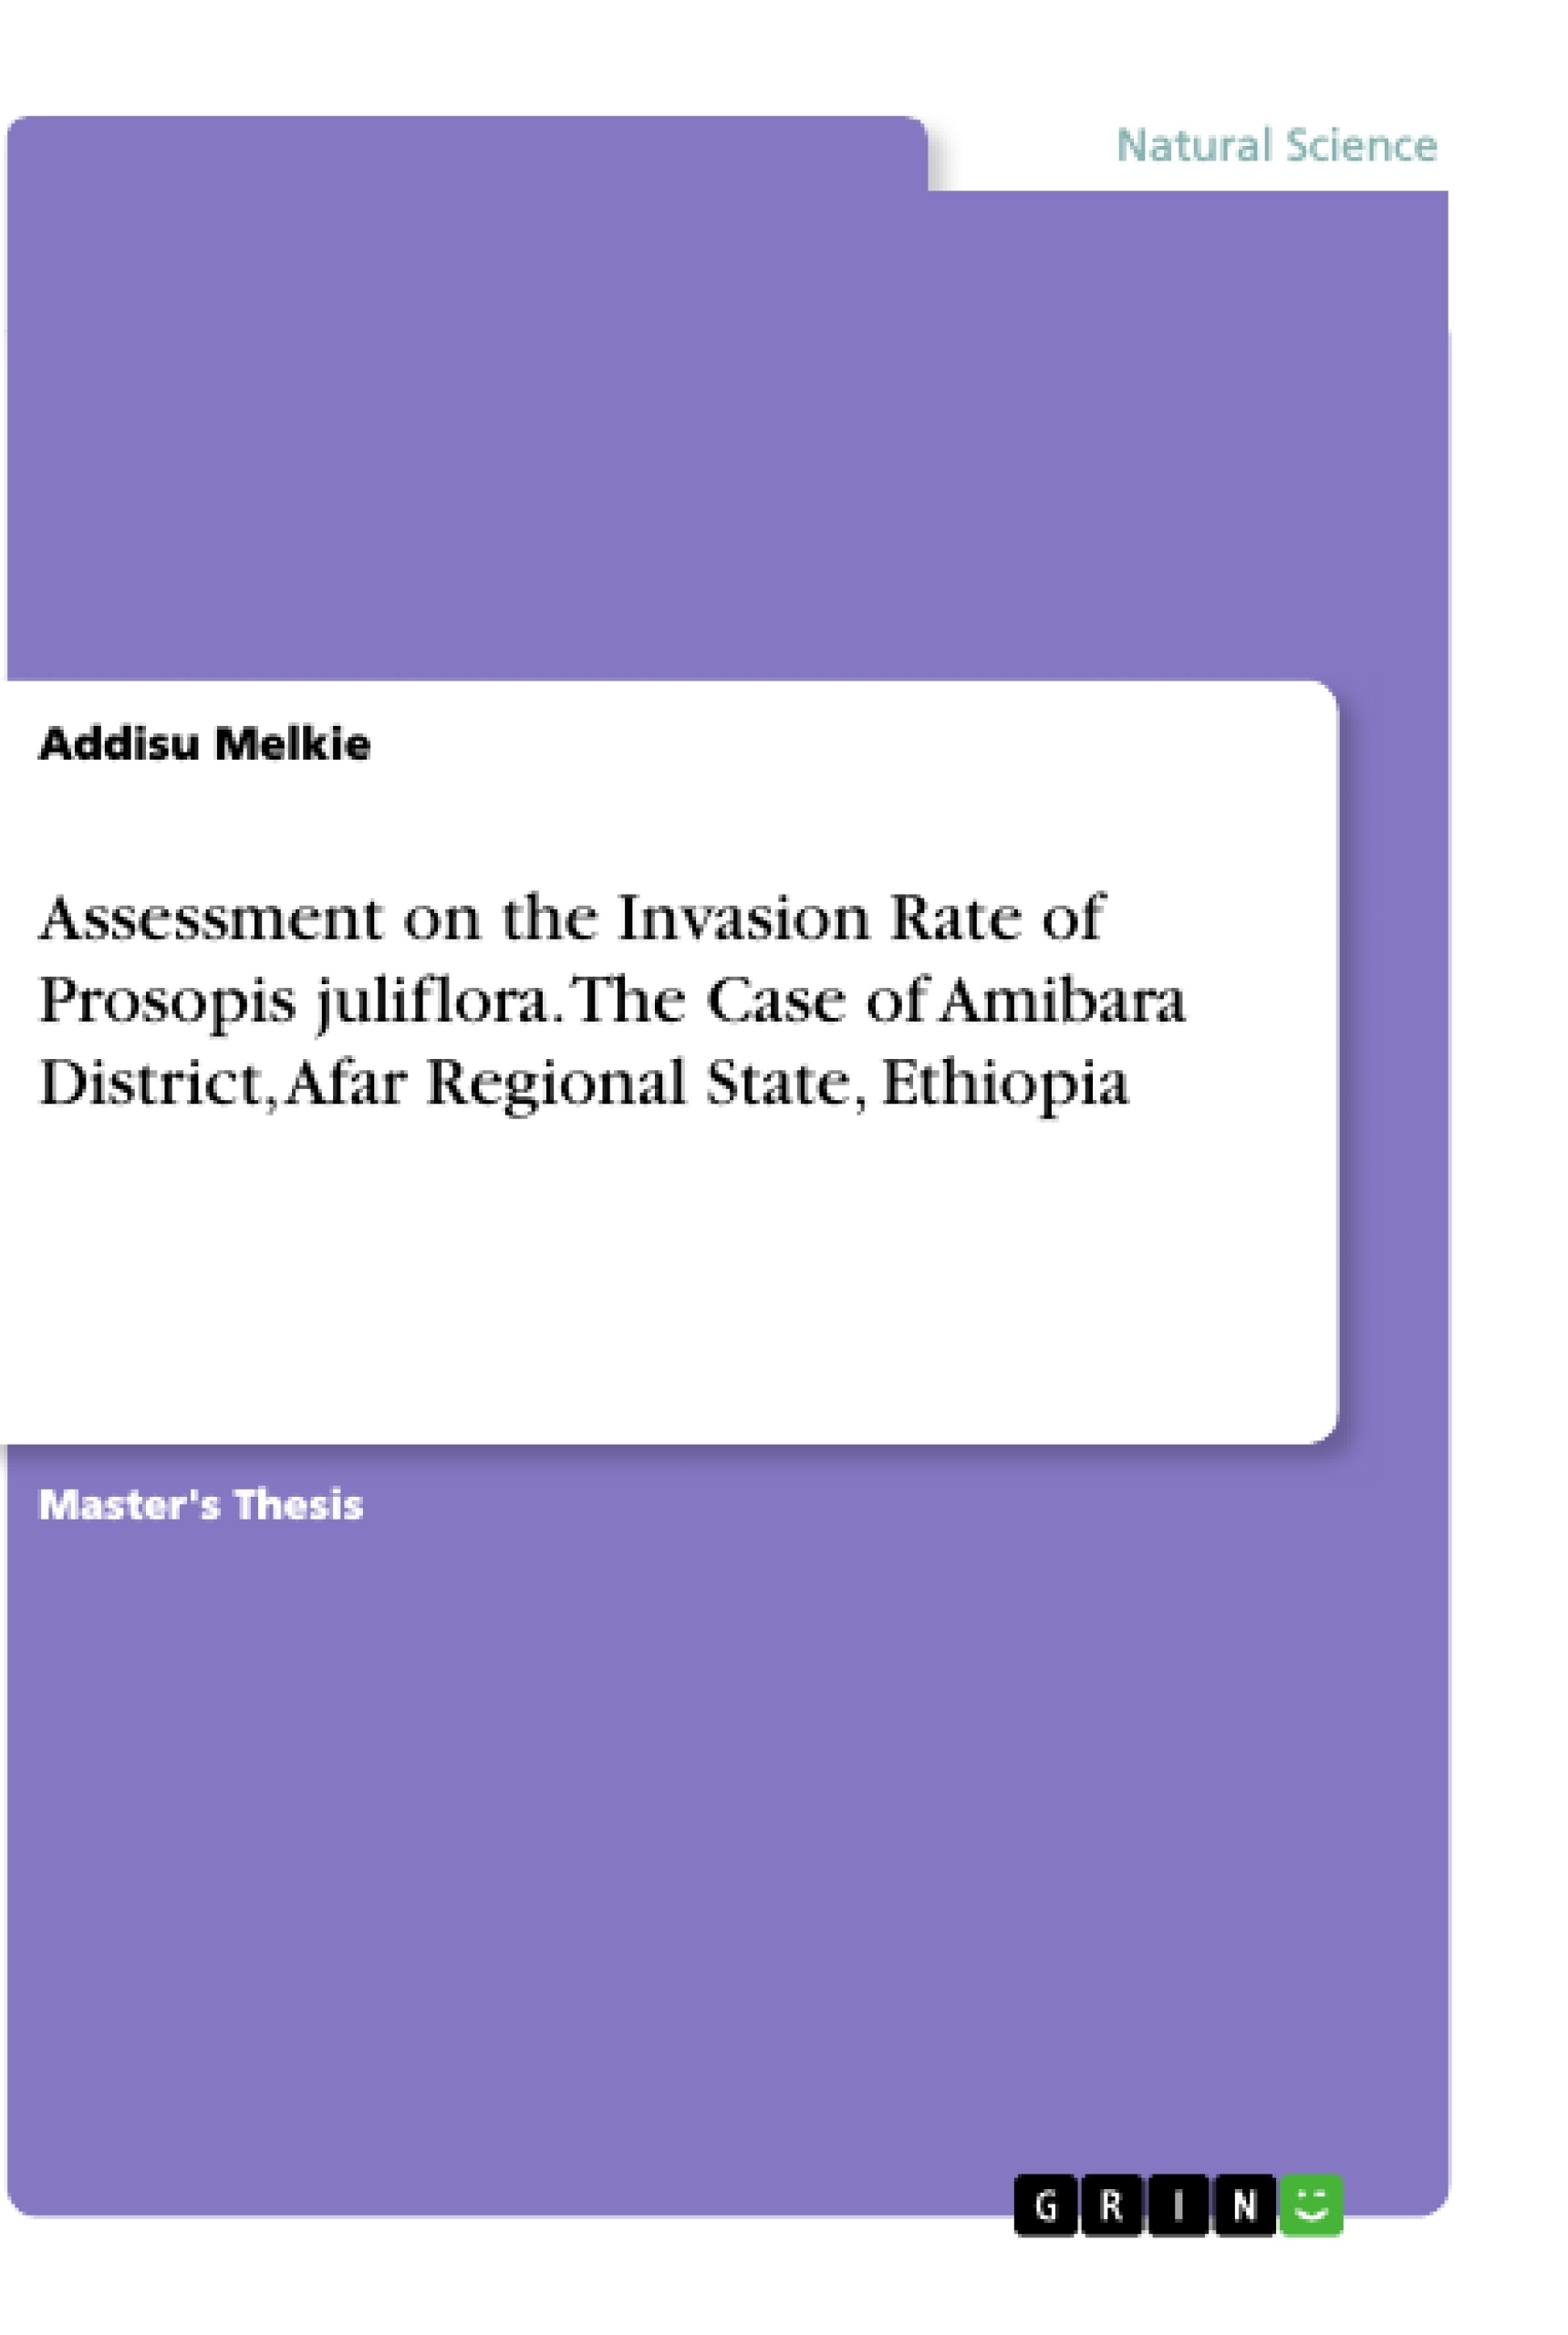 Title: Assessment on the Invasion Rate of Prosopis juliflora. The Case of Amibara District, Afar Regional State, Ethiopia